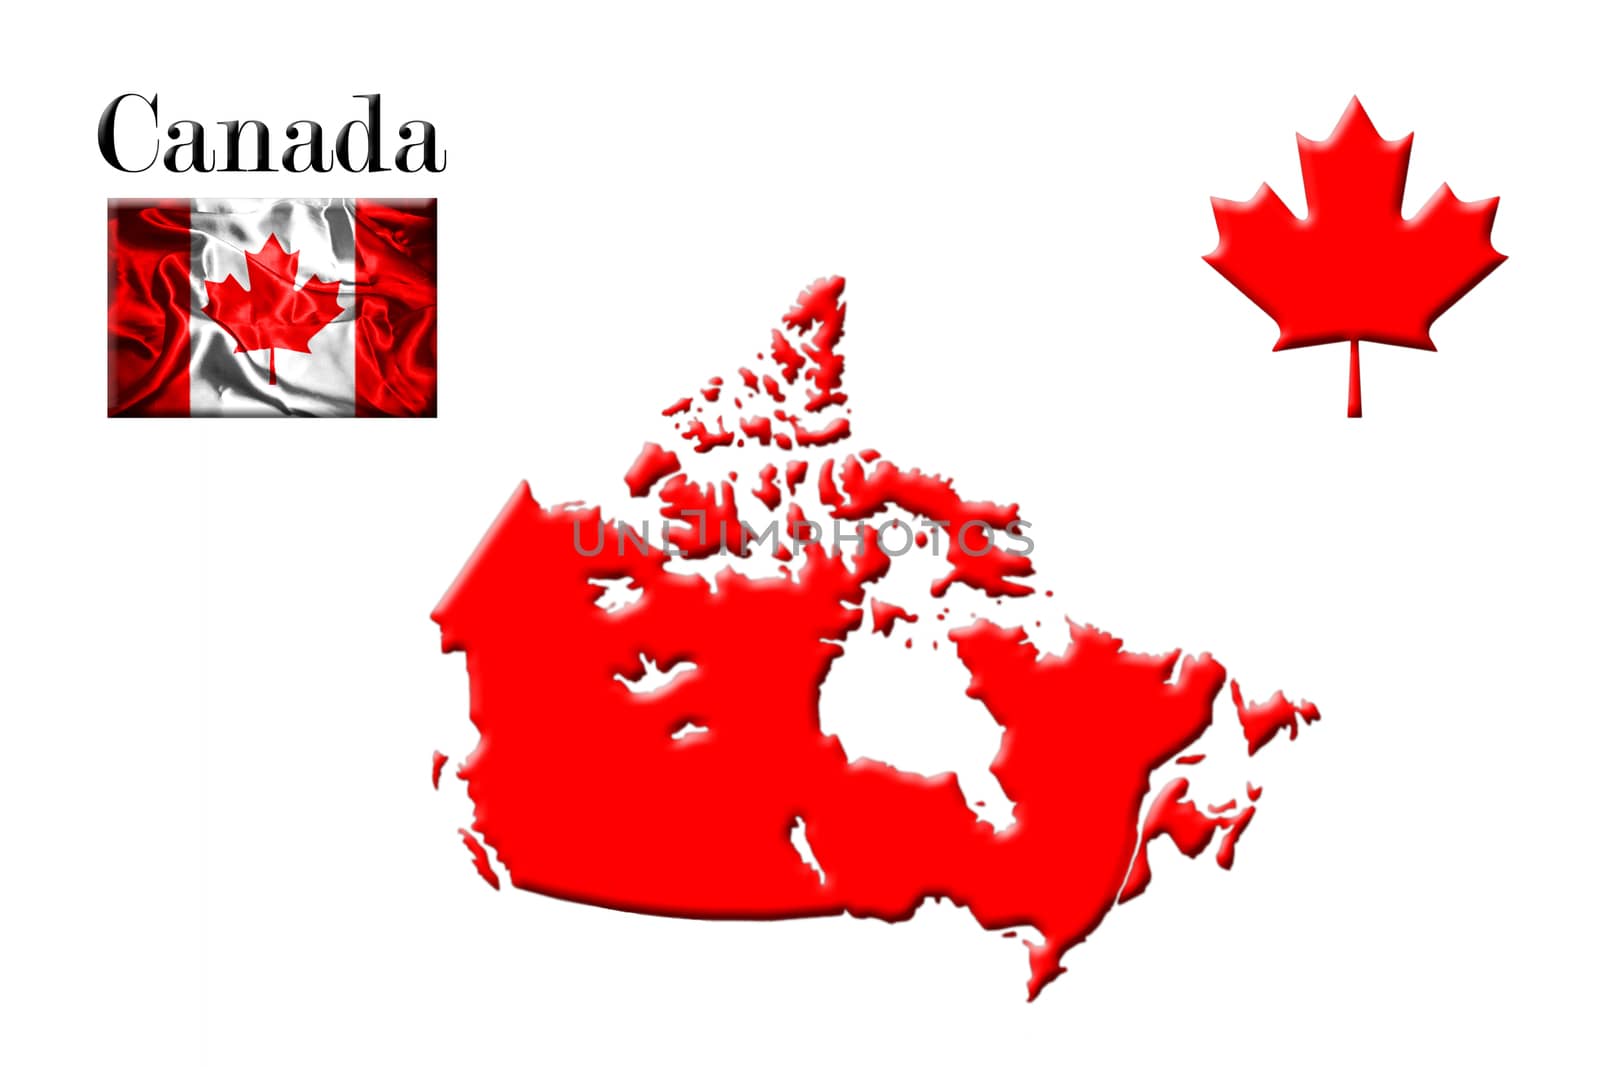 Canadian Map With Flag And Maple Leaf 3D Rendering by alexandarilich